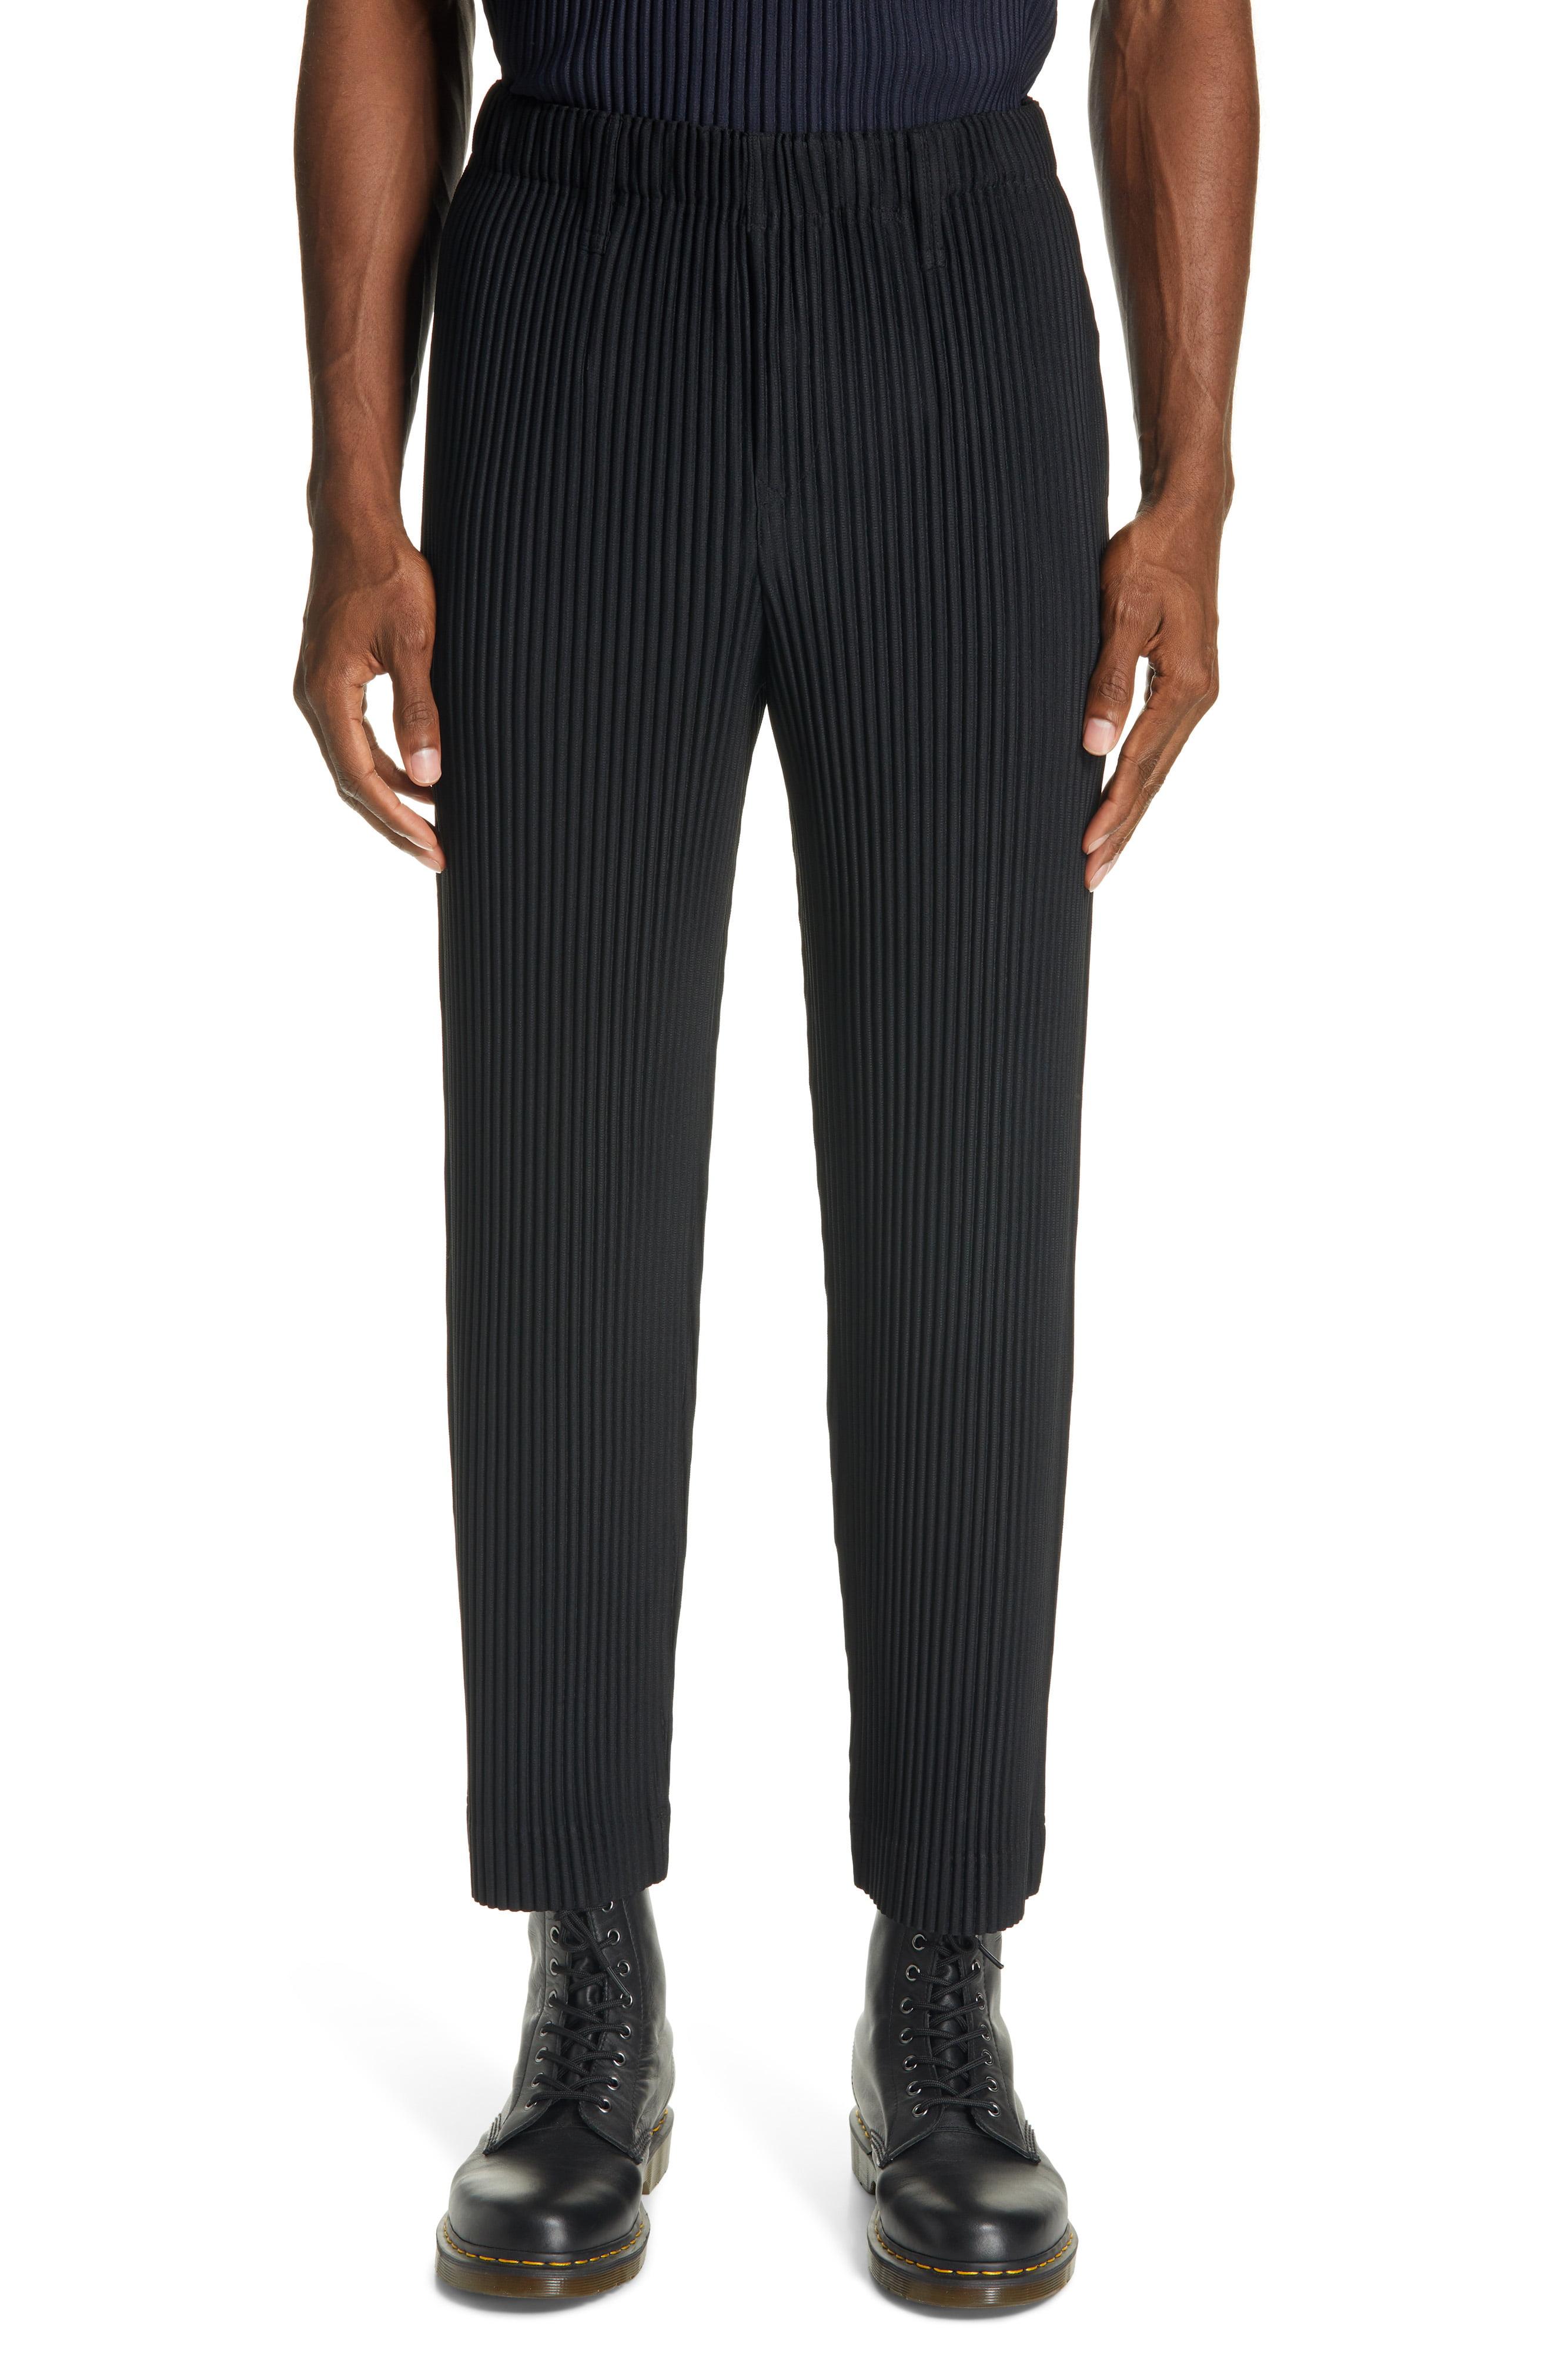 Homme Plissé Issey Miyake Pleated Pants in Black for Men - Lyst